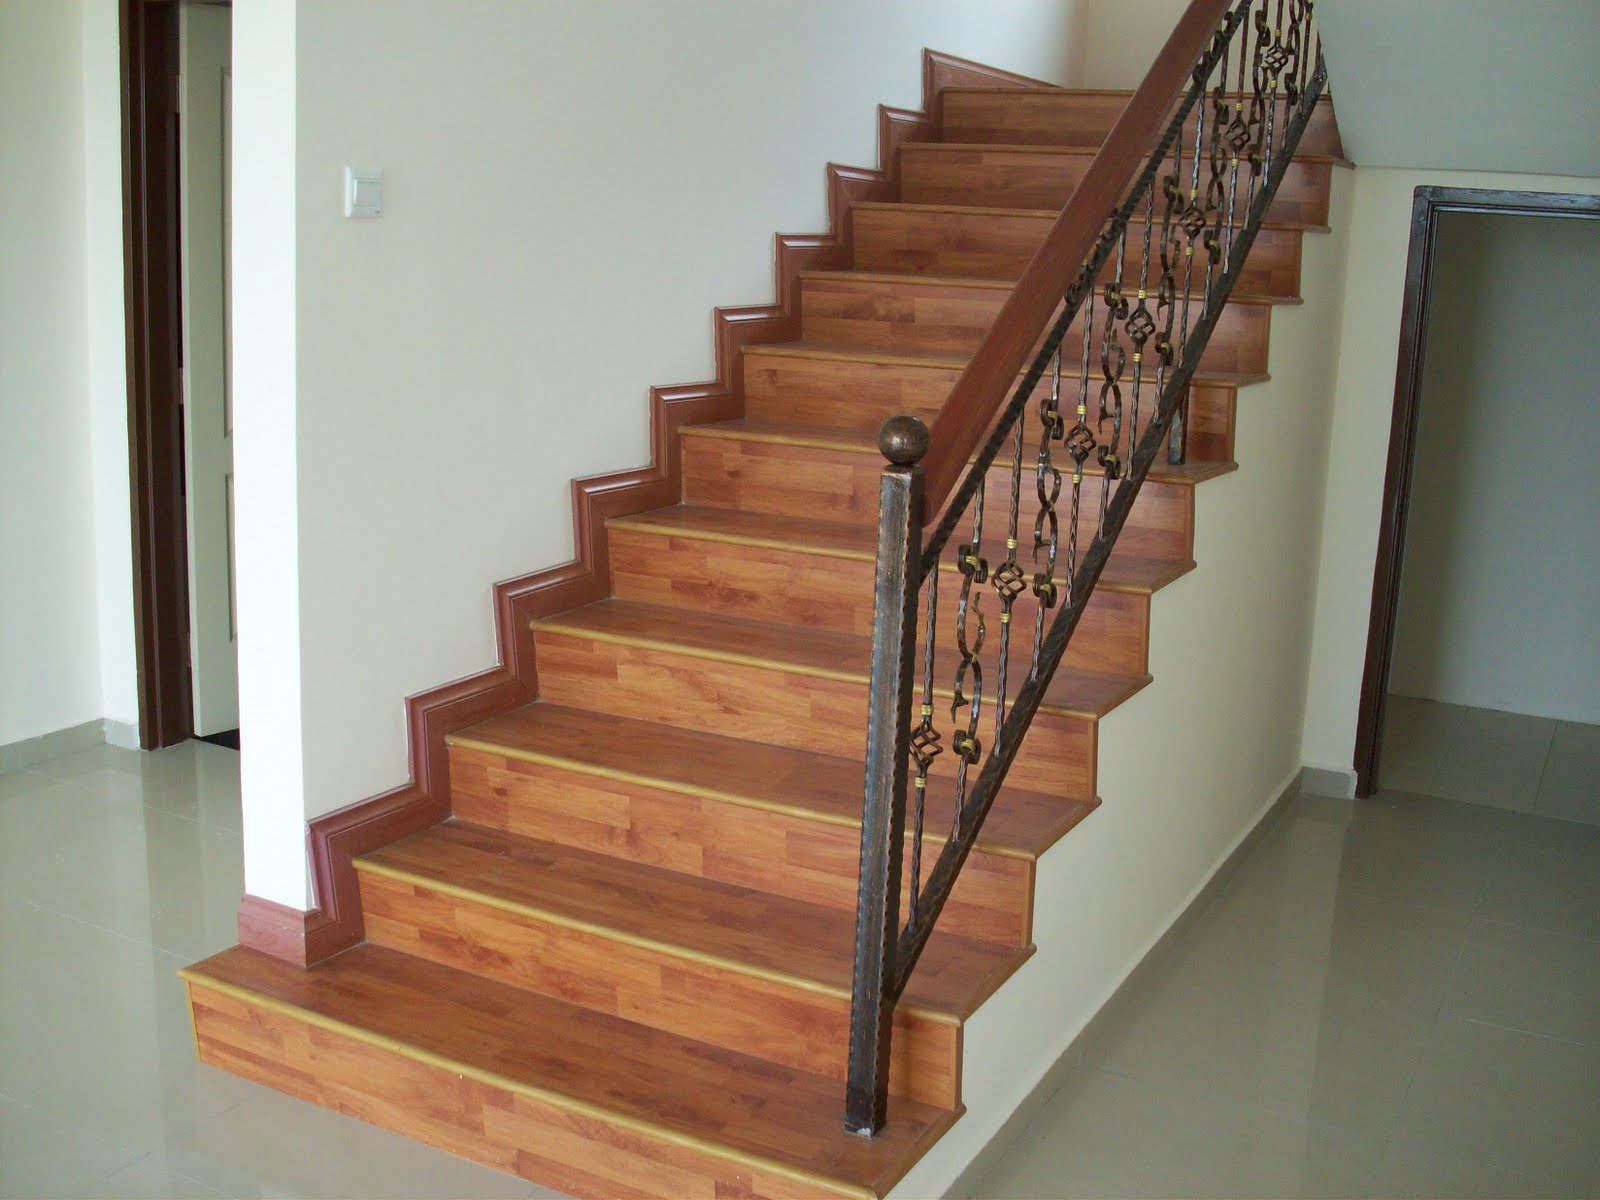 How To Install Wood Flooring On Stairs, Can You Use Hardwood Flooring On Stairs